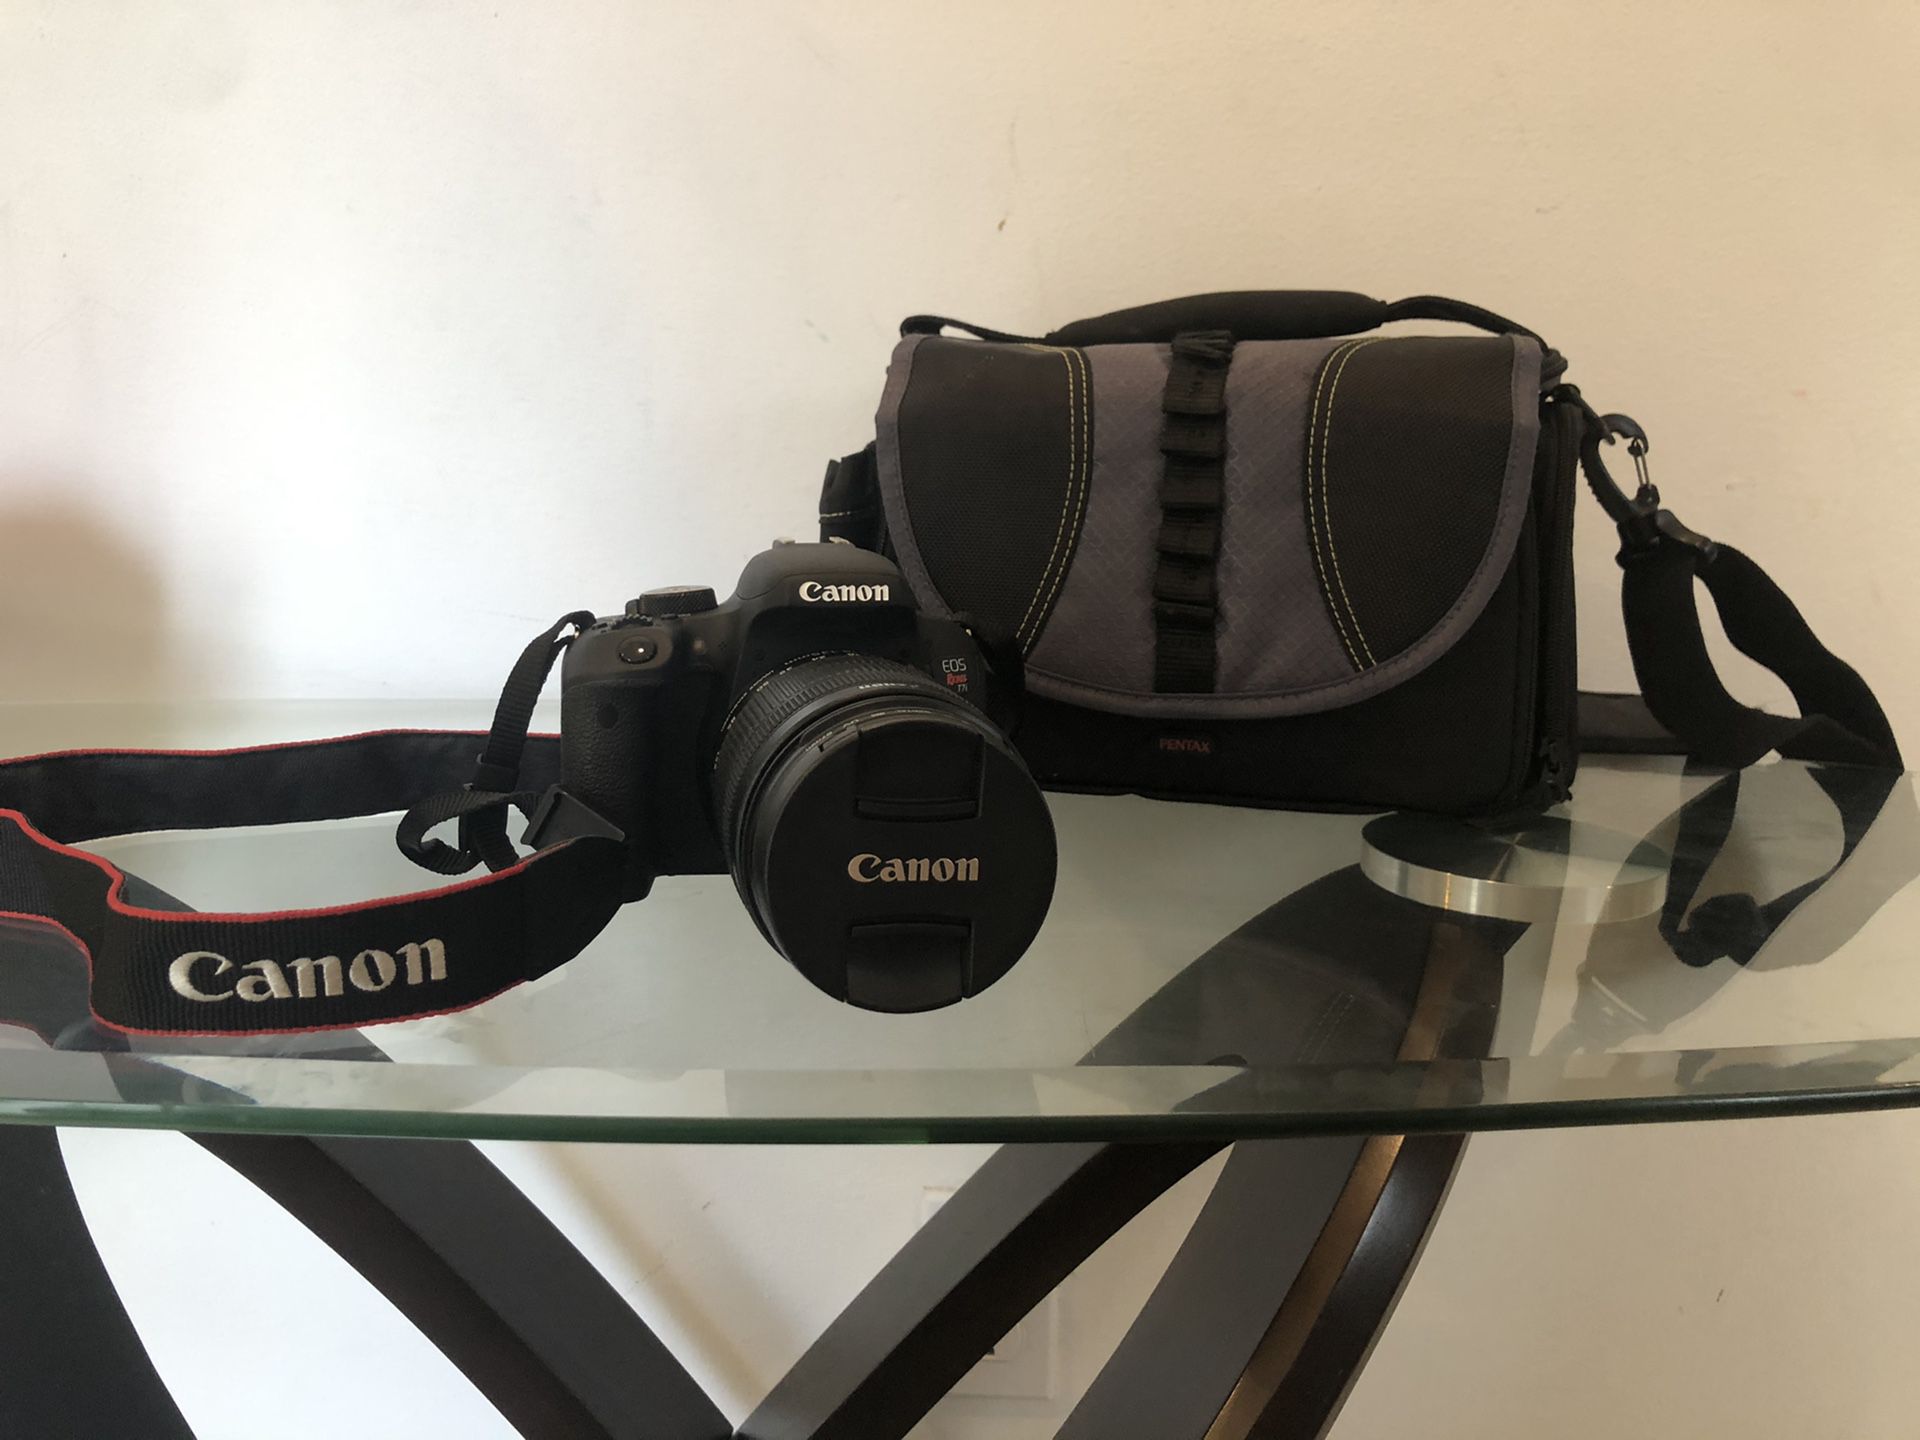 Like New, Canon EOS Rebel T7i 24.2MP Digital SLR Camera Bundle with EF-S 18-135mm STM Lens, 32GB SD Card, and Camera Bag